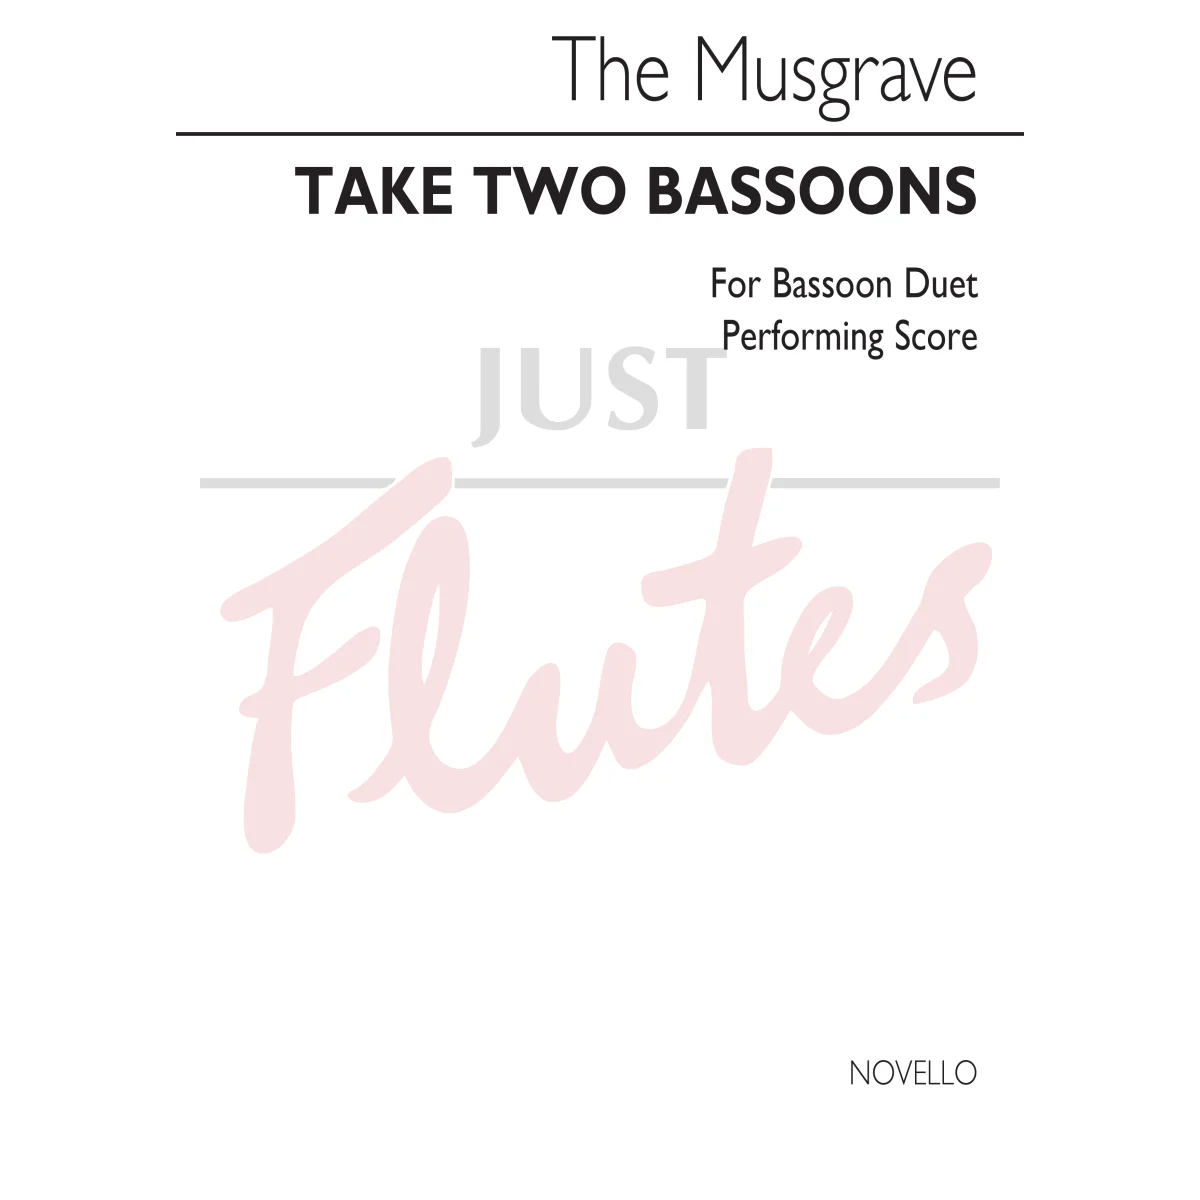 Take Two Bassoons for Bassoon Duet